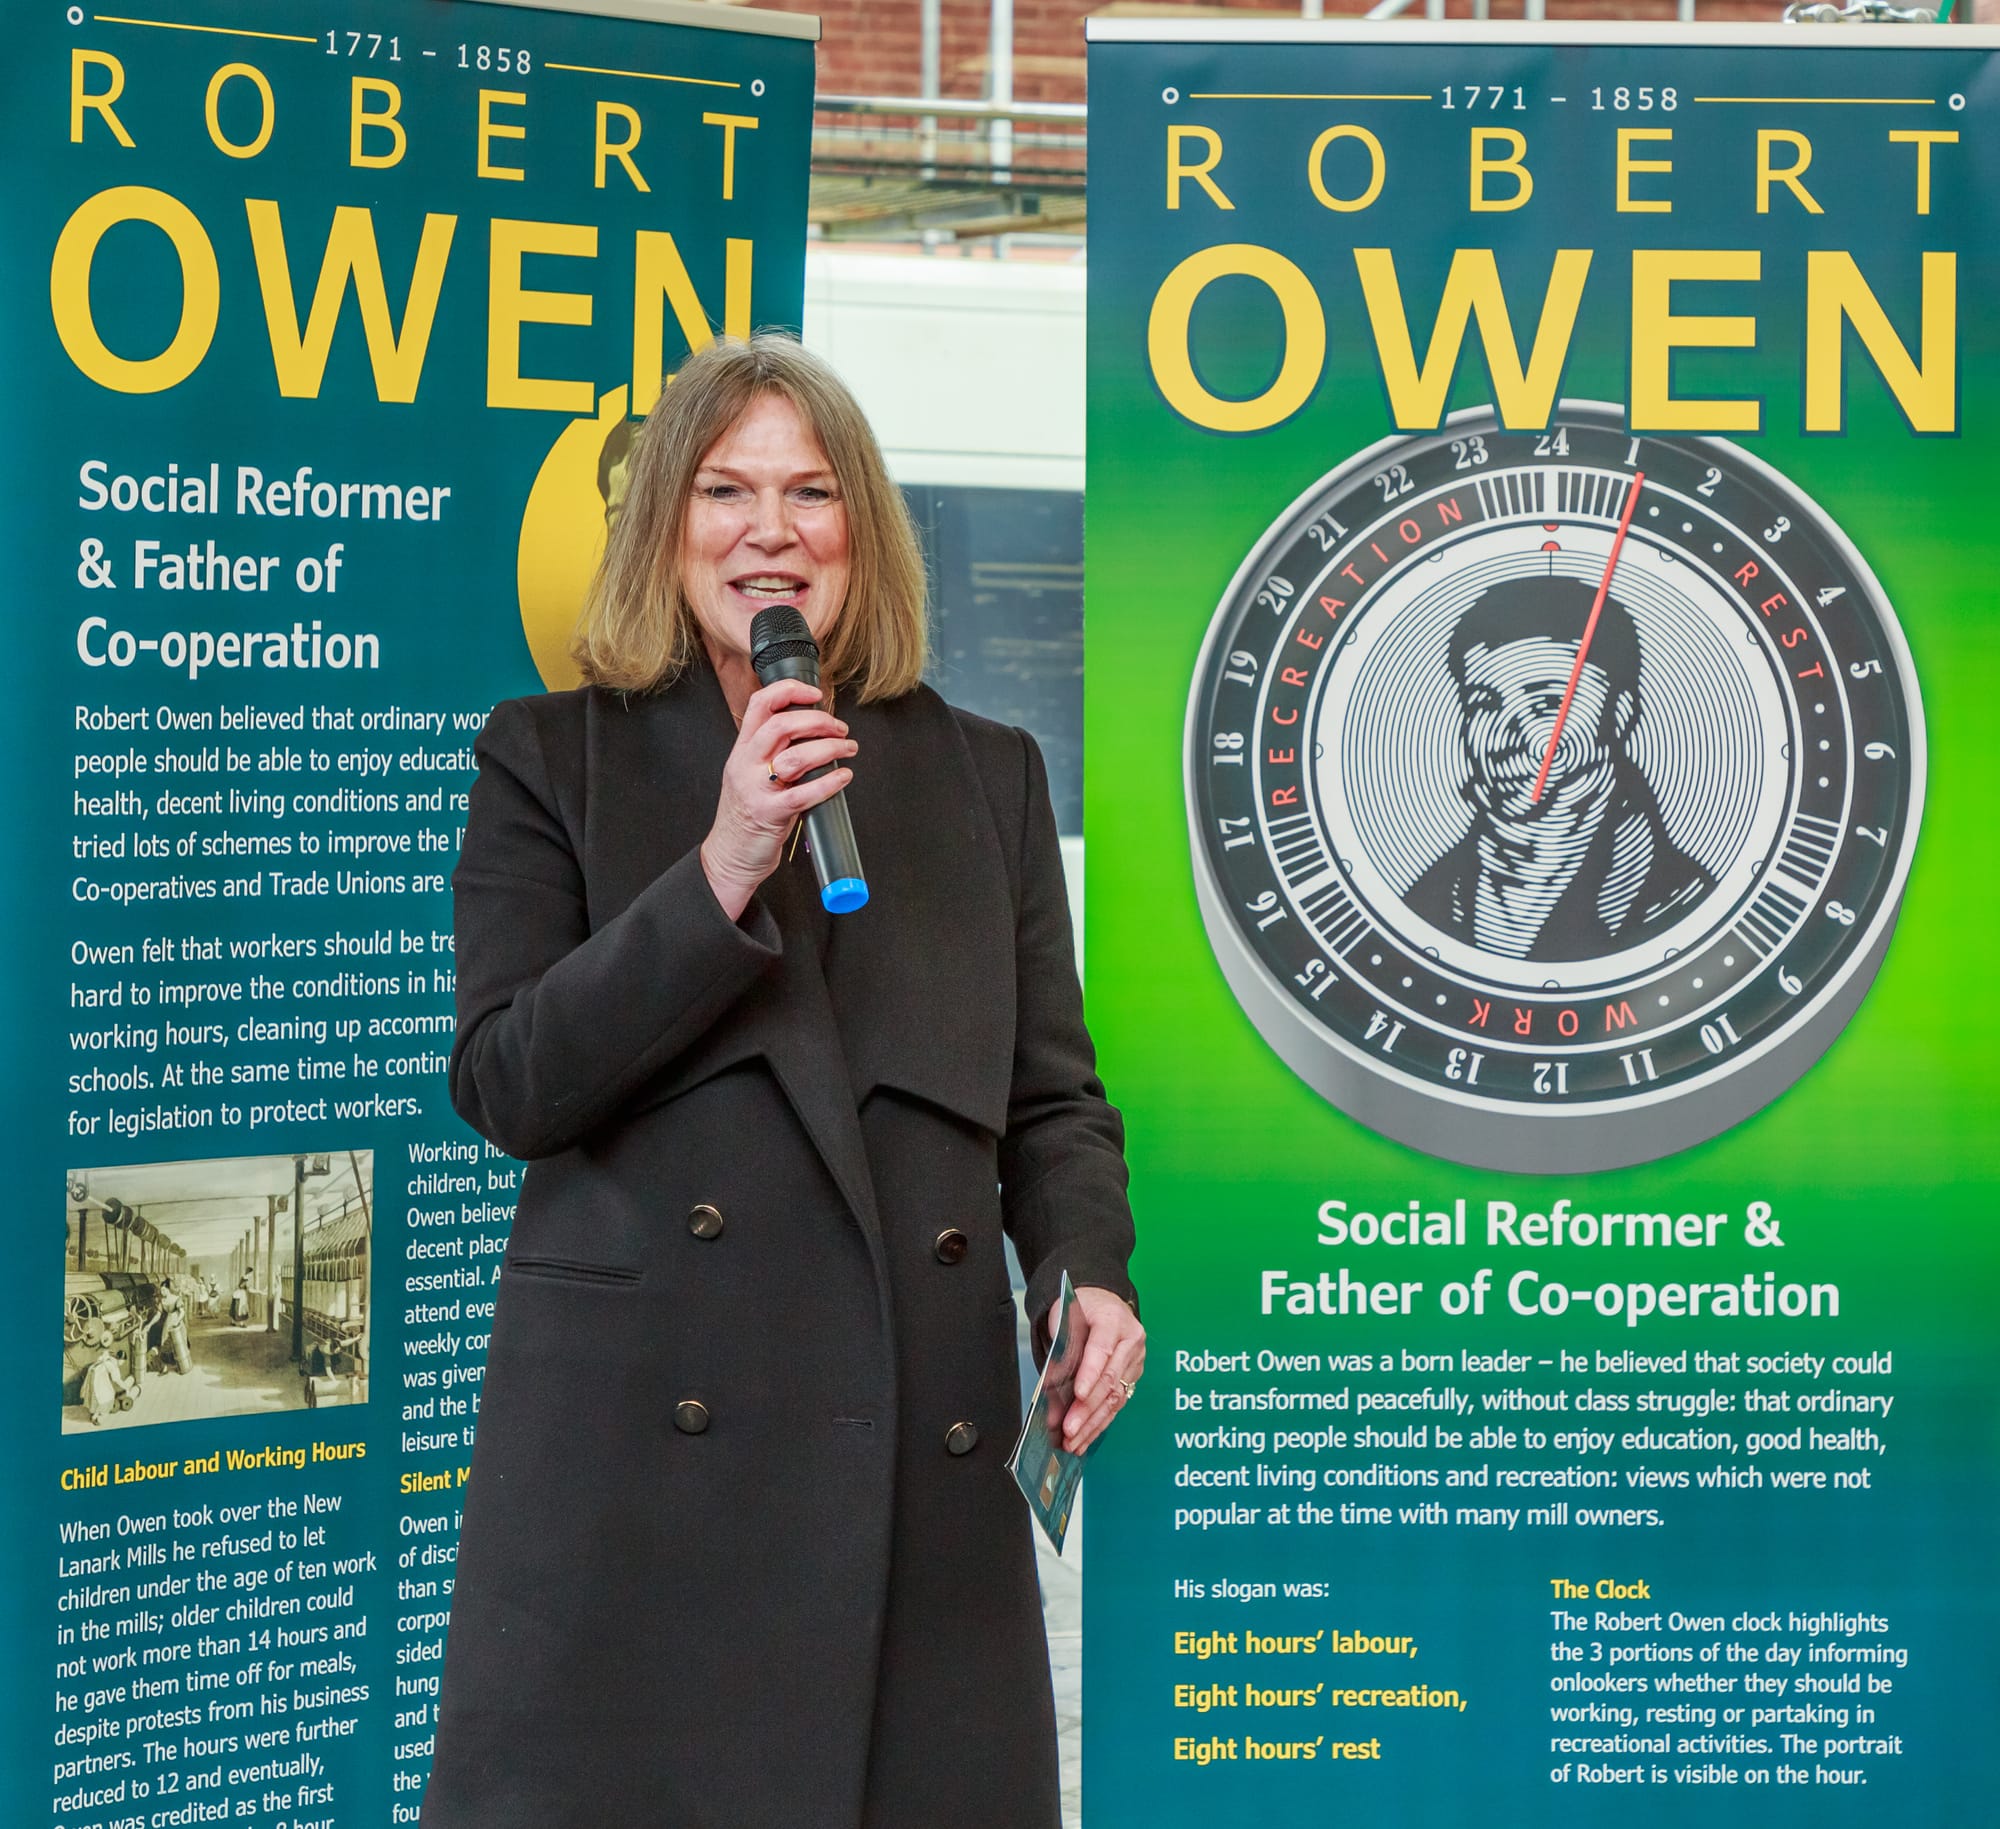 Robert Owen, Father of Co-operation making his mark in Belper!